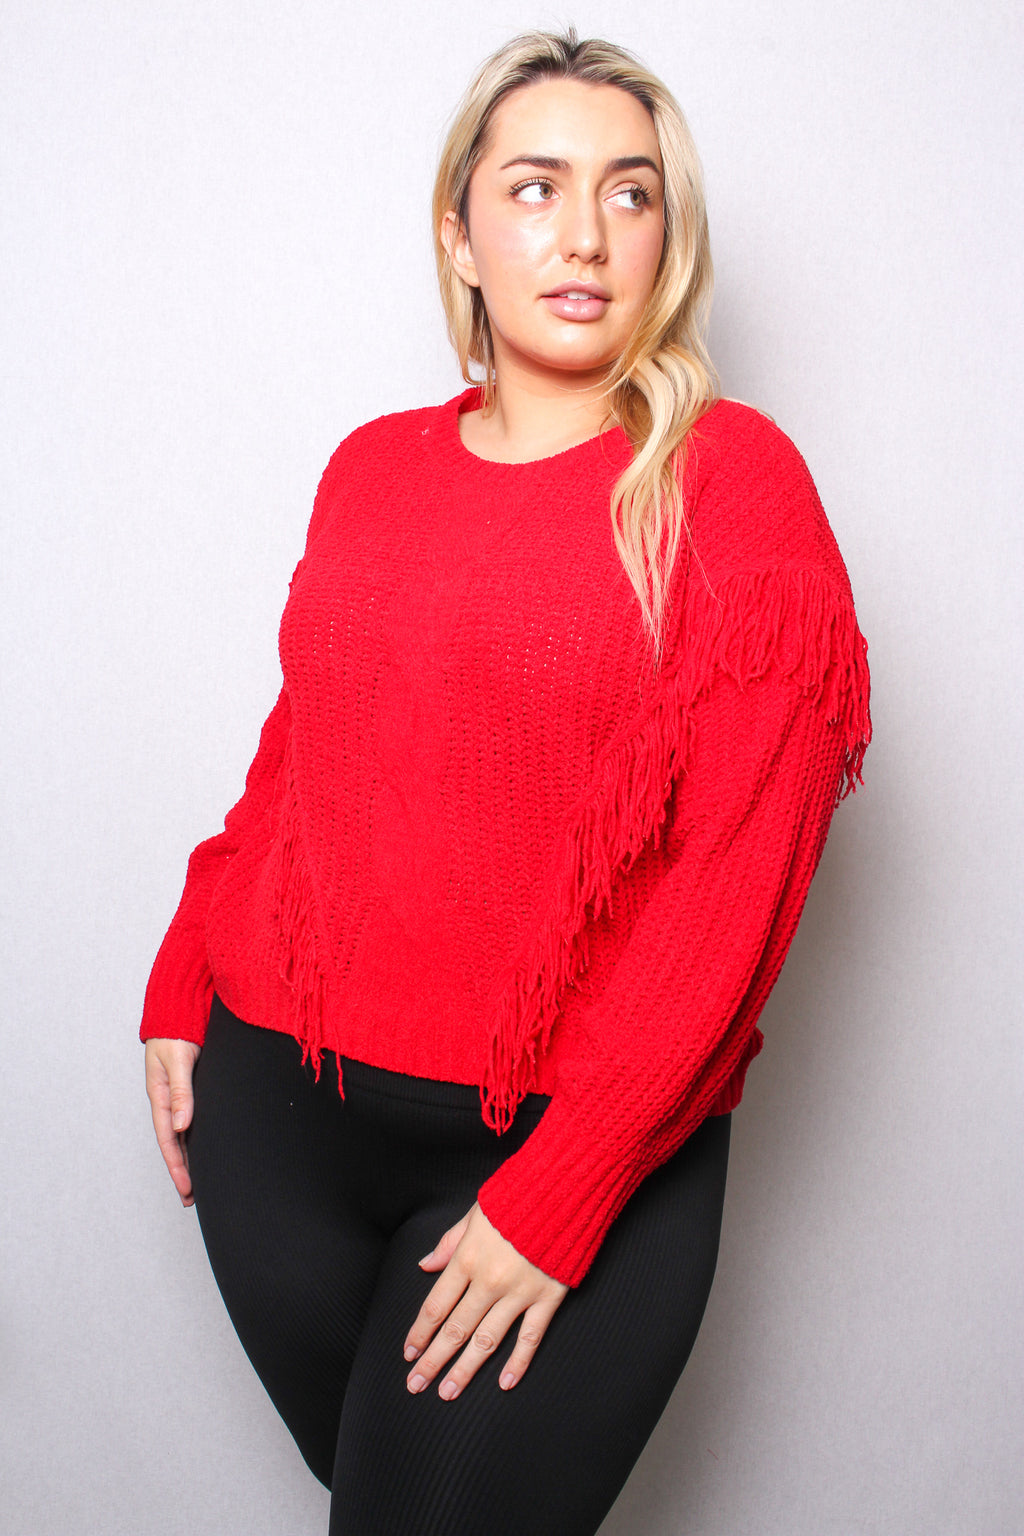 Women's Plus Long Sleeves Round Neck Fringe Knit Sweater Top